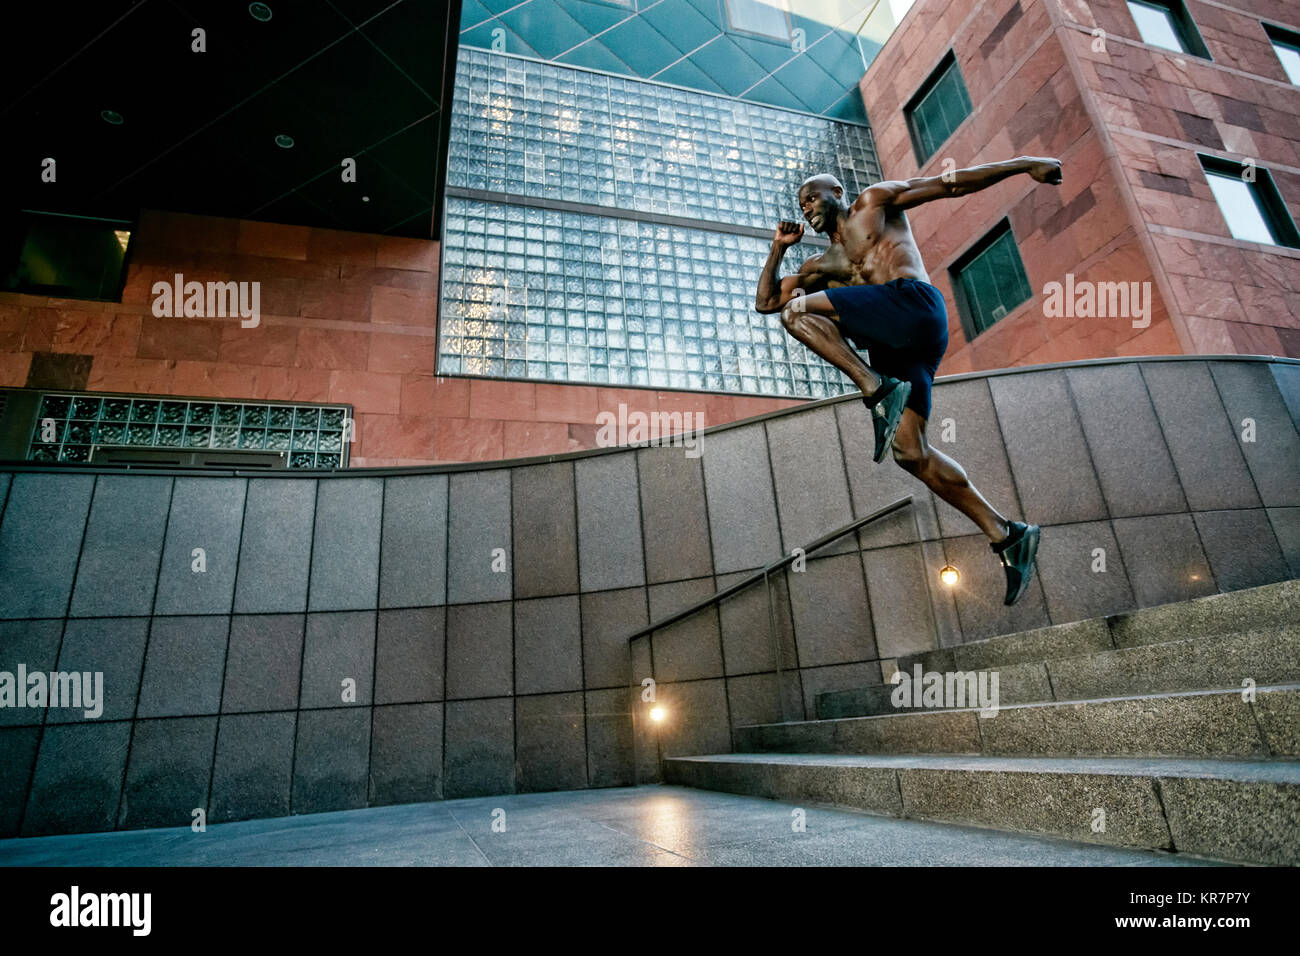 Black man running and jumping on stairs in city Stock Photo